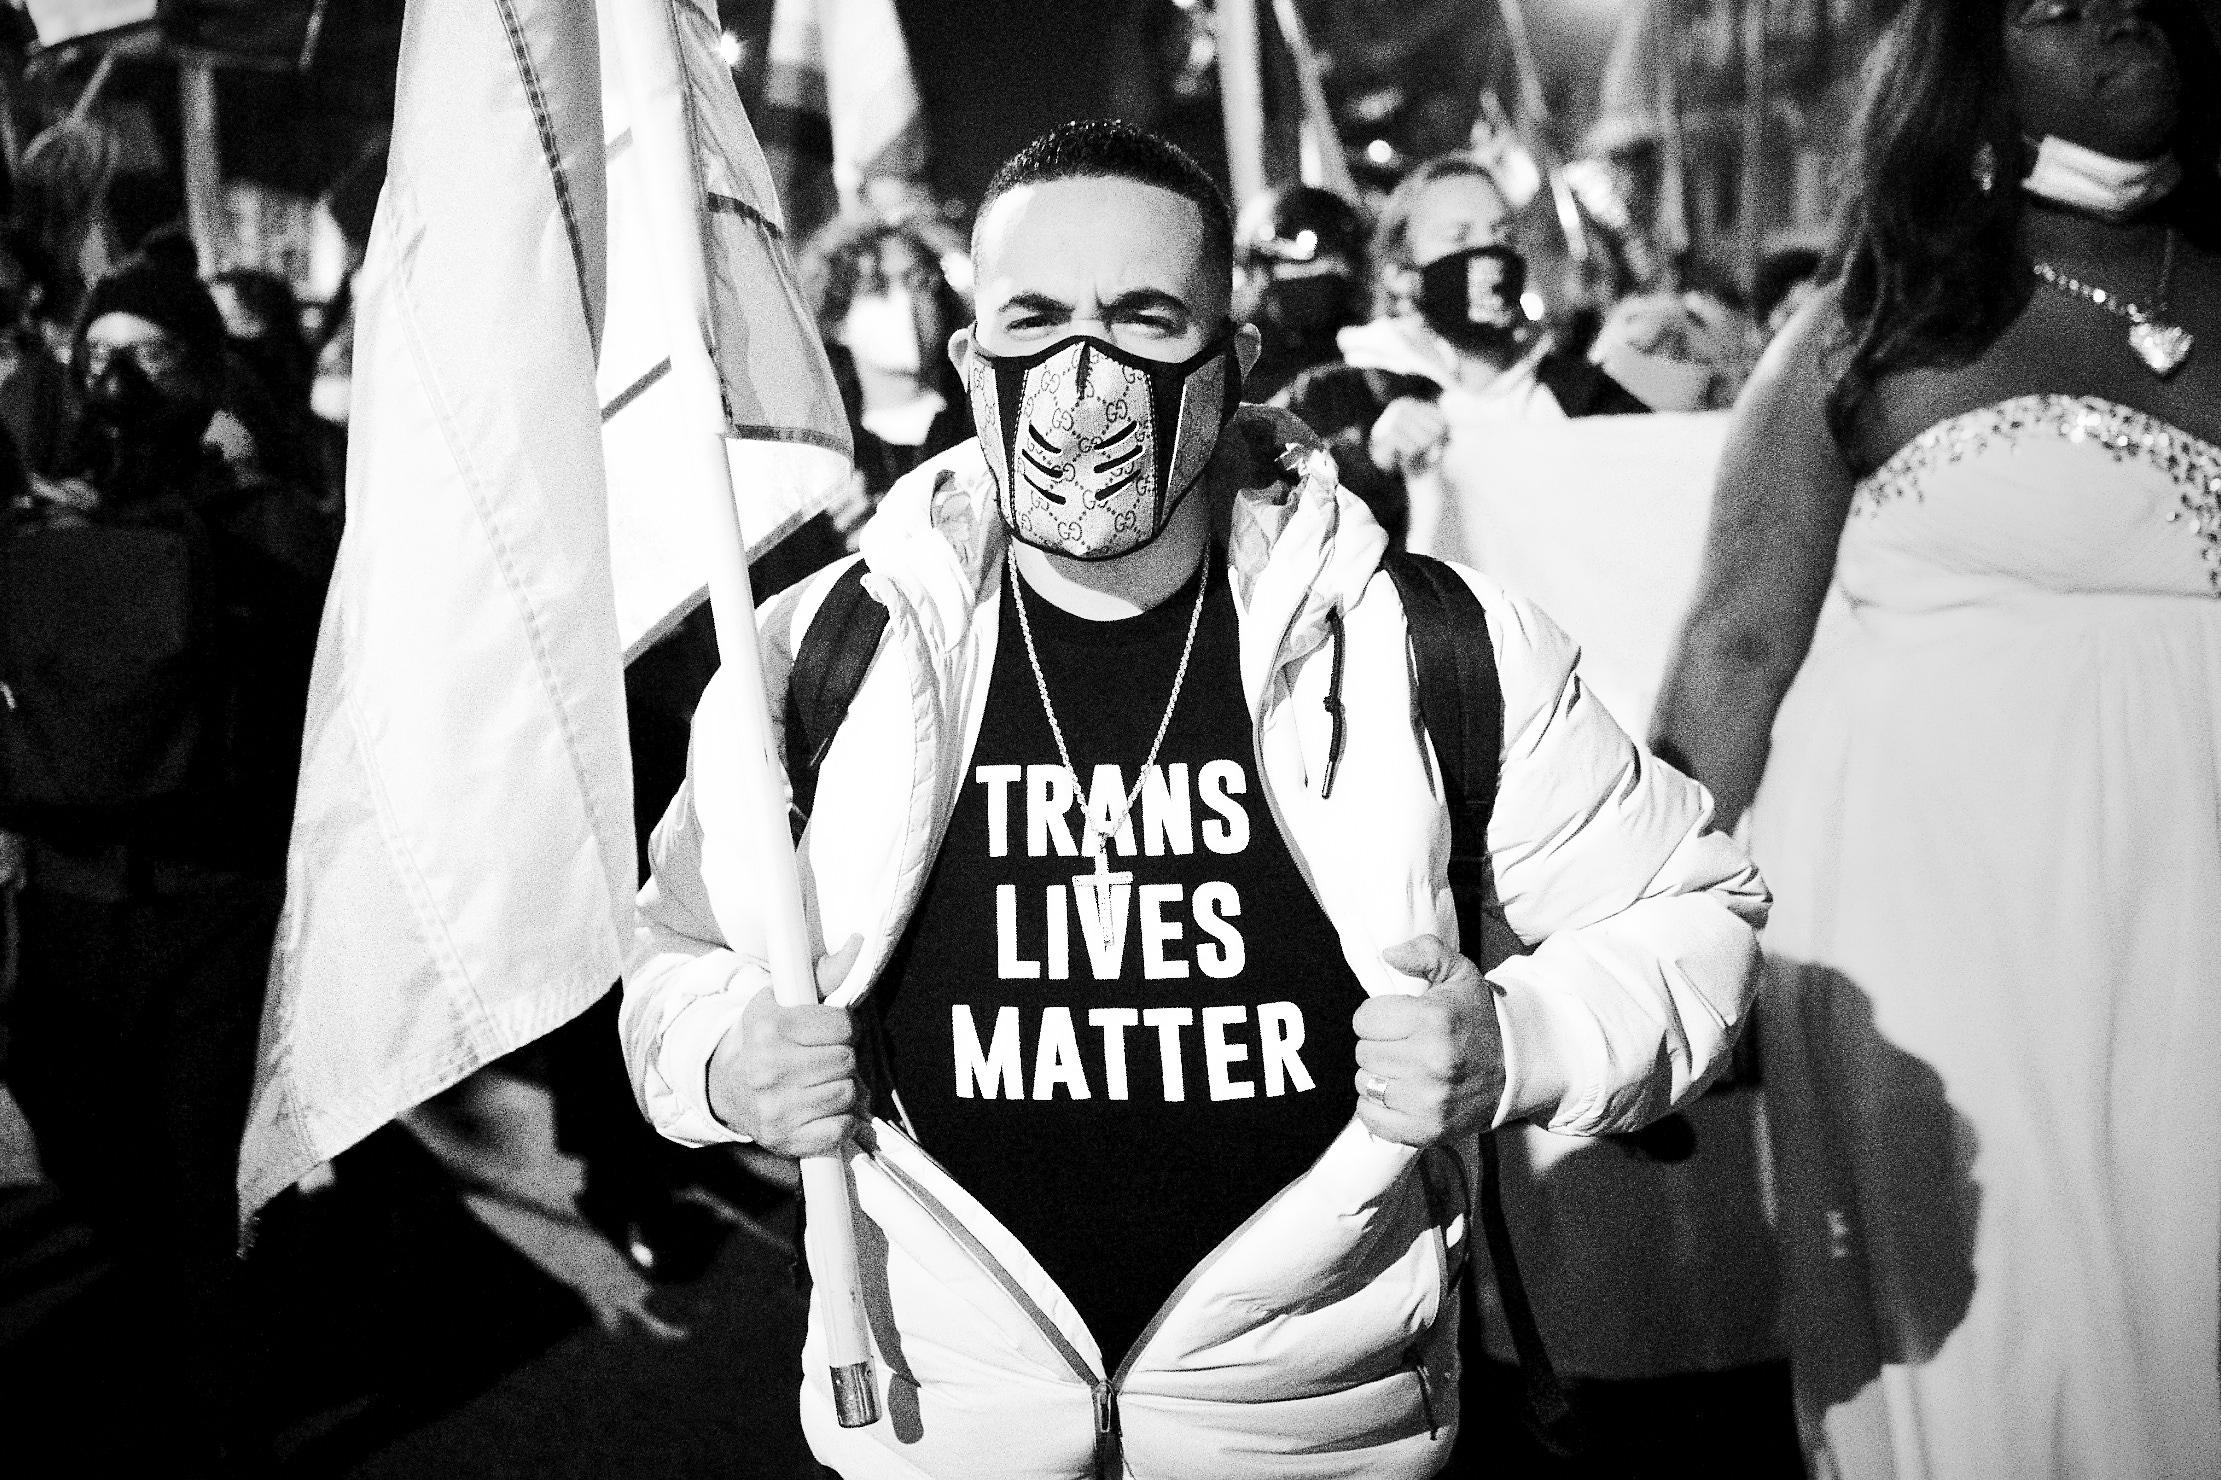 20201119-1_NYC_Protests_Stonewall_03_0656_SeanWaltrous